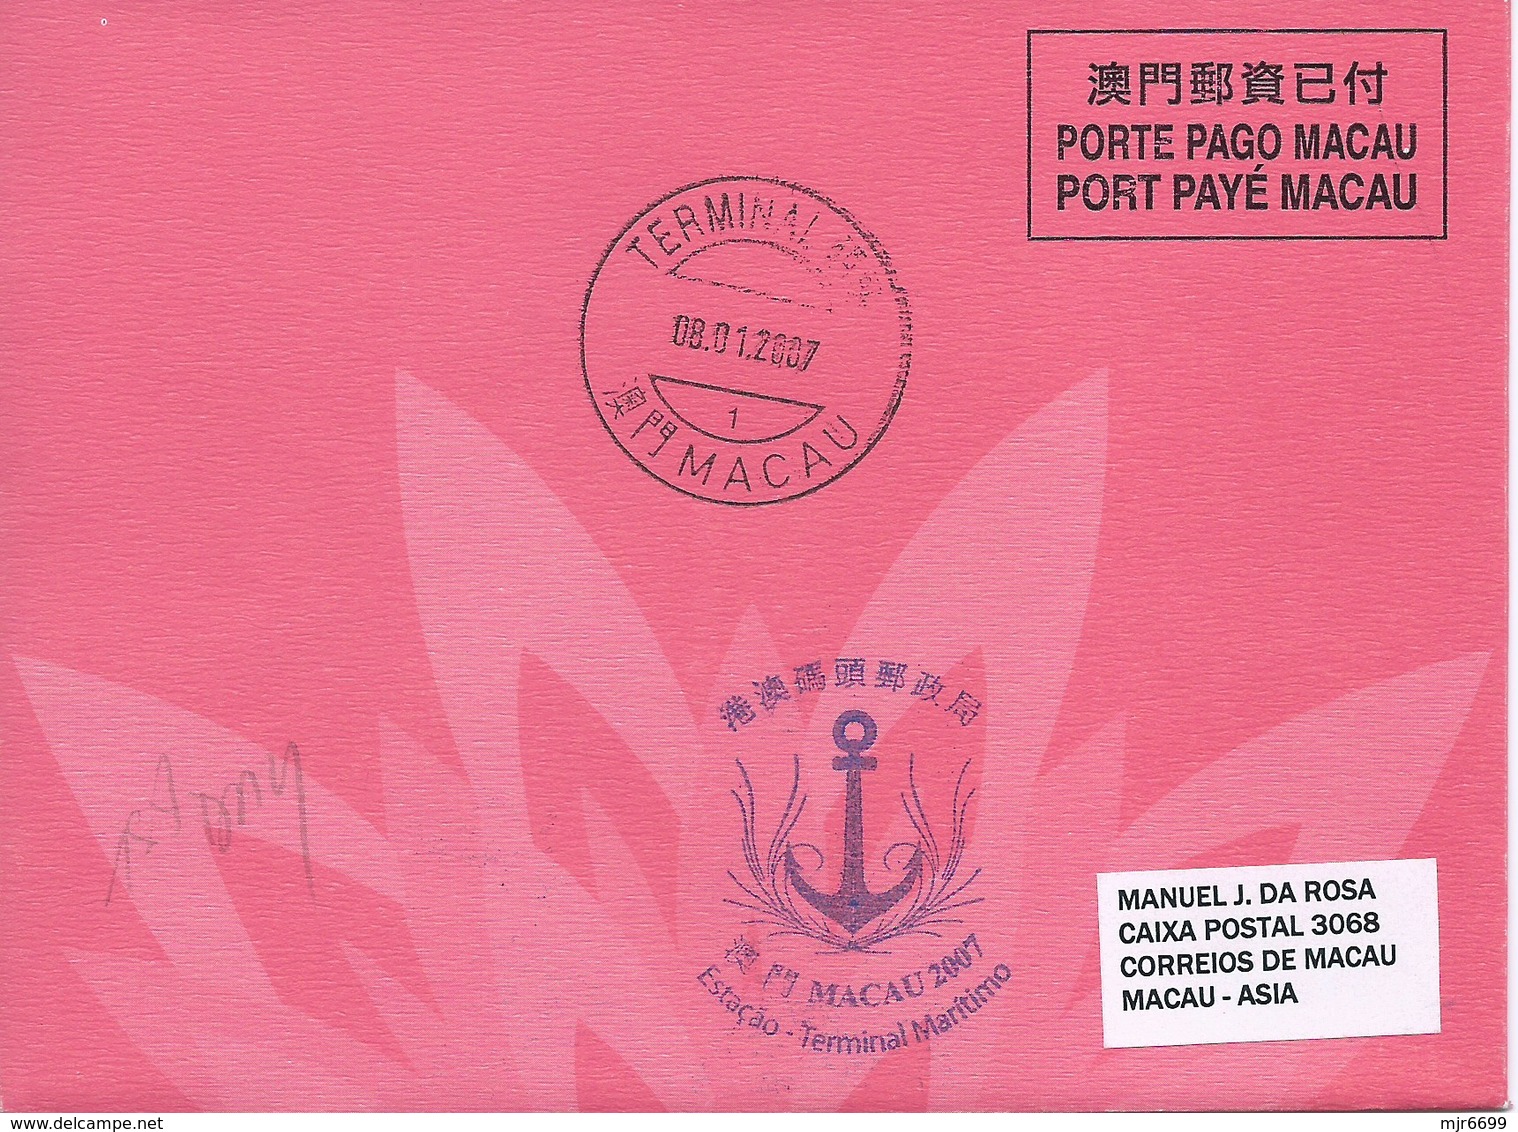 MACAU 2007 LUNAR YEAR OF THE PIG GREETING CARD & POSTAGE PAID COVER FIRST DAY USAGE - Ganzsachen